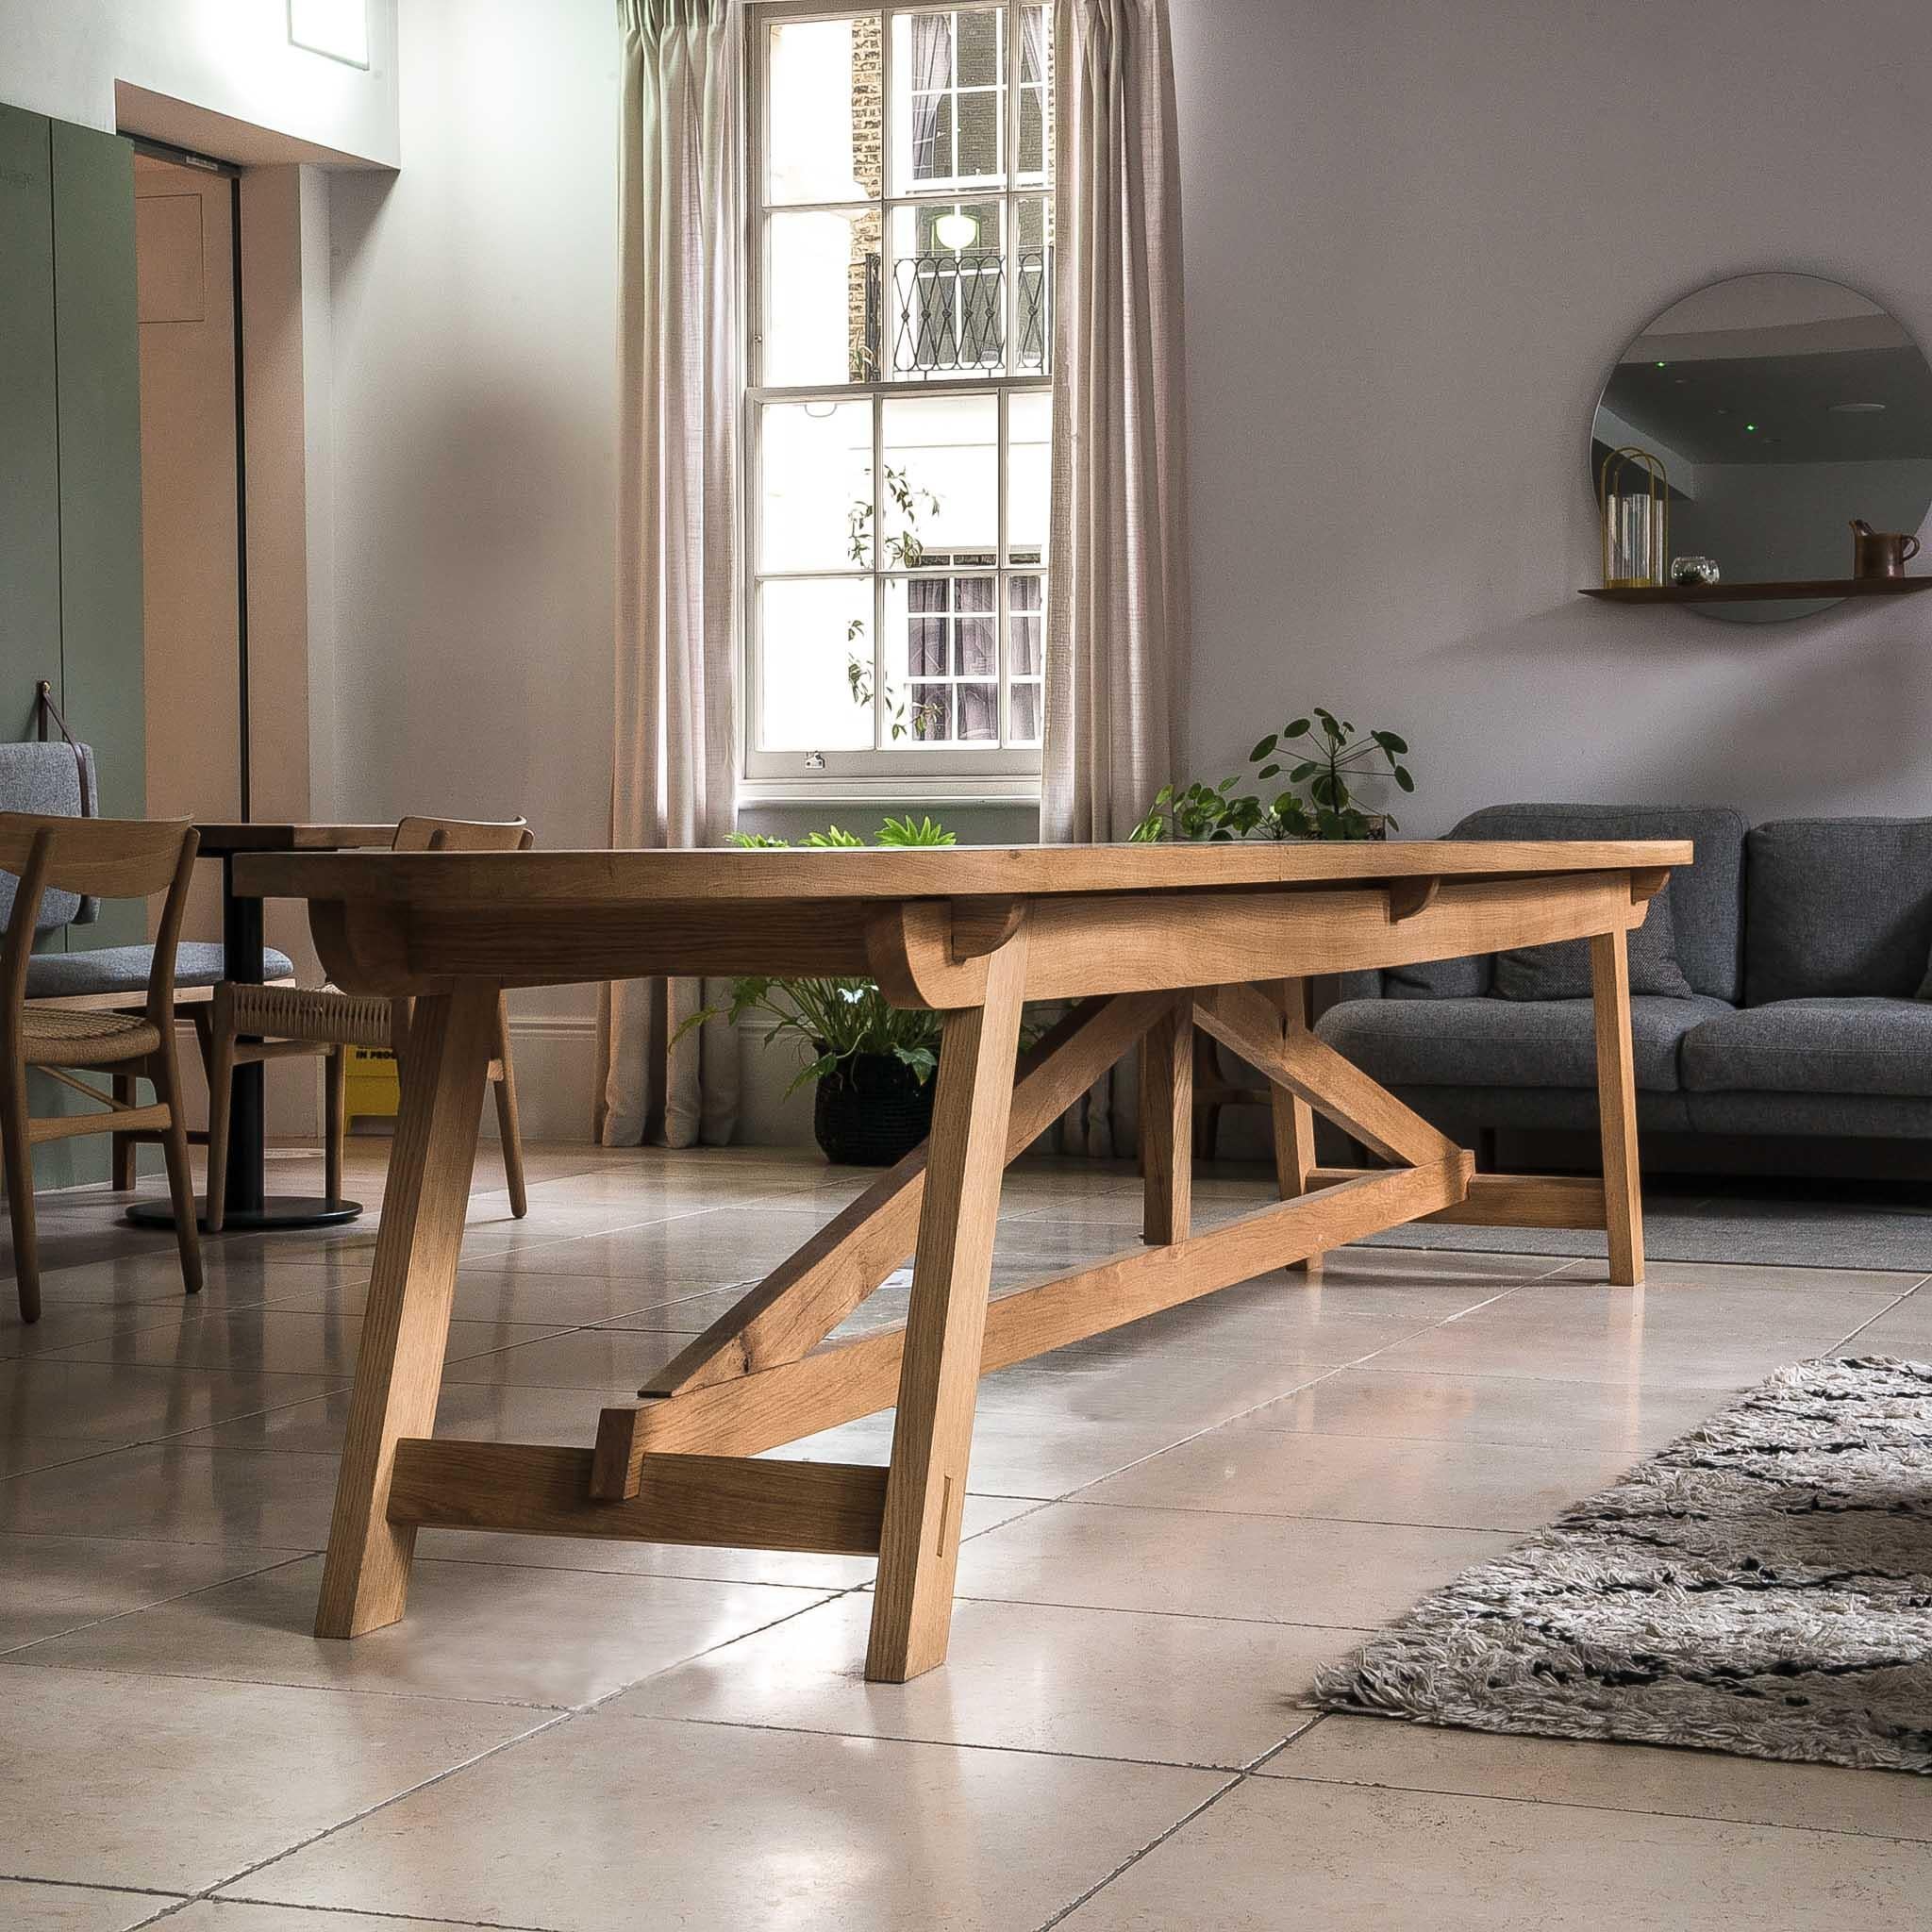 This elegant and classic dining table focuses on purity of form, and is the perfect meeting place for sharing delicious food and wine with family and friends. The table is crafted using timber-frame joinery and British hardwood of the finest